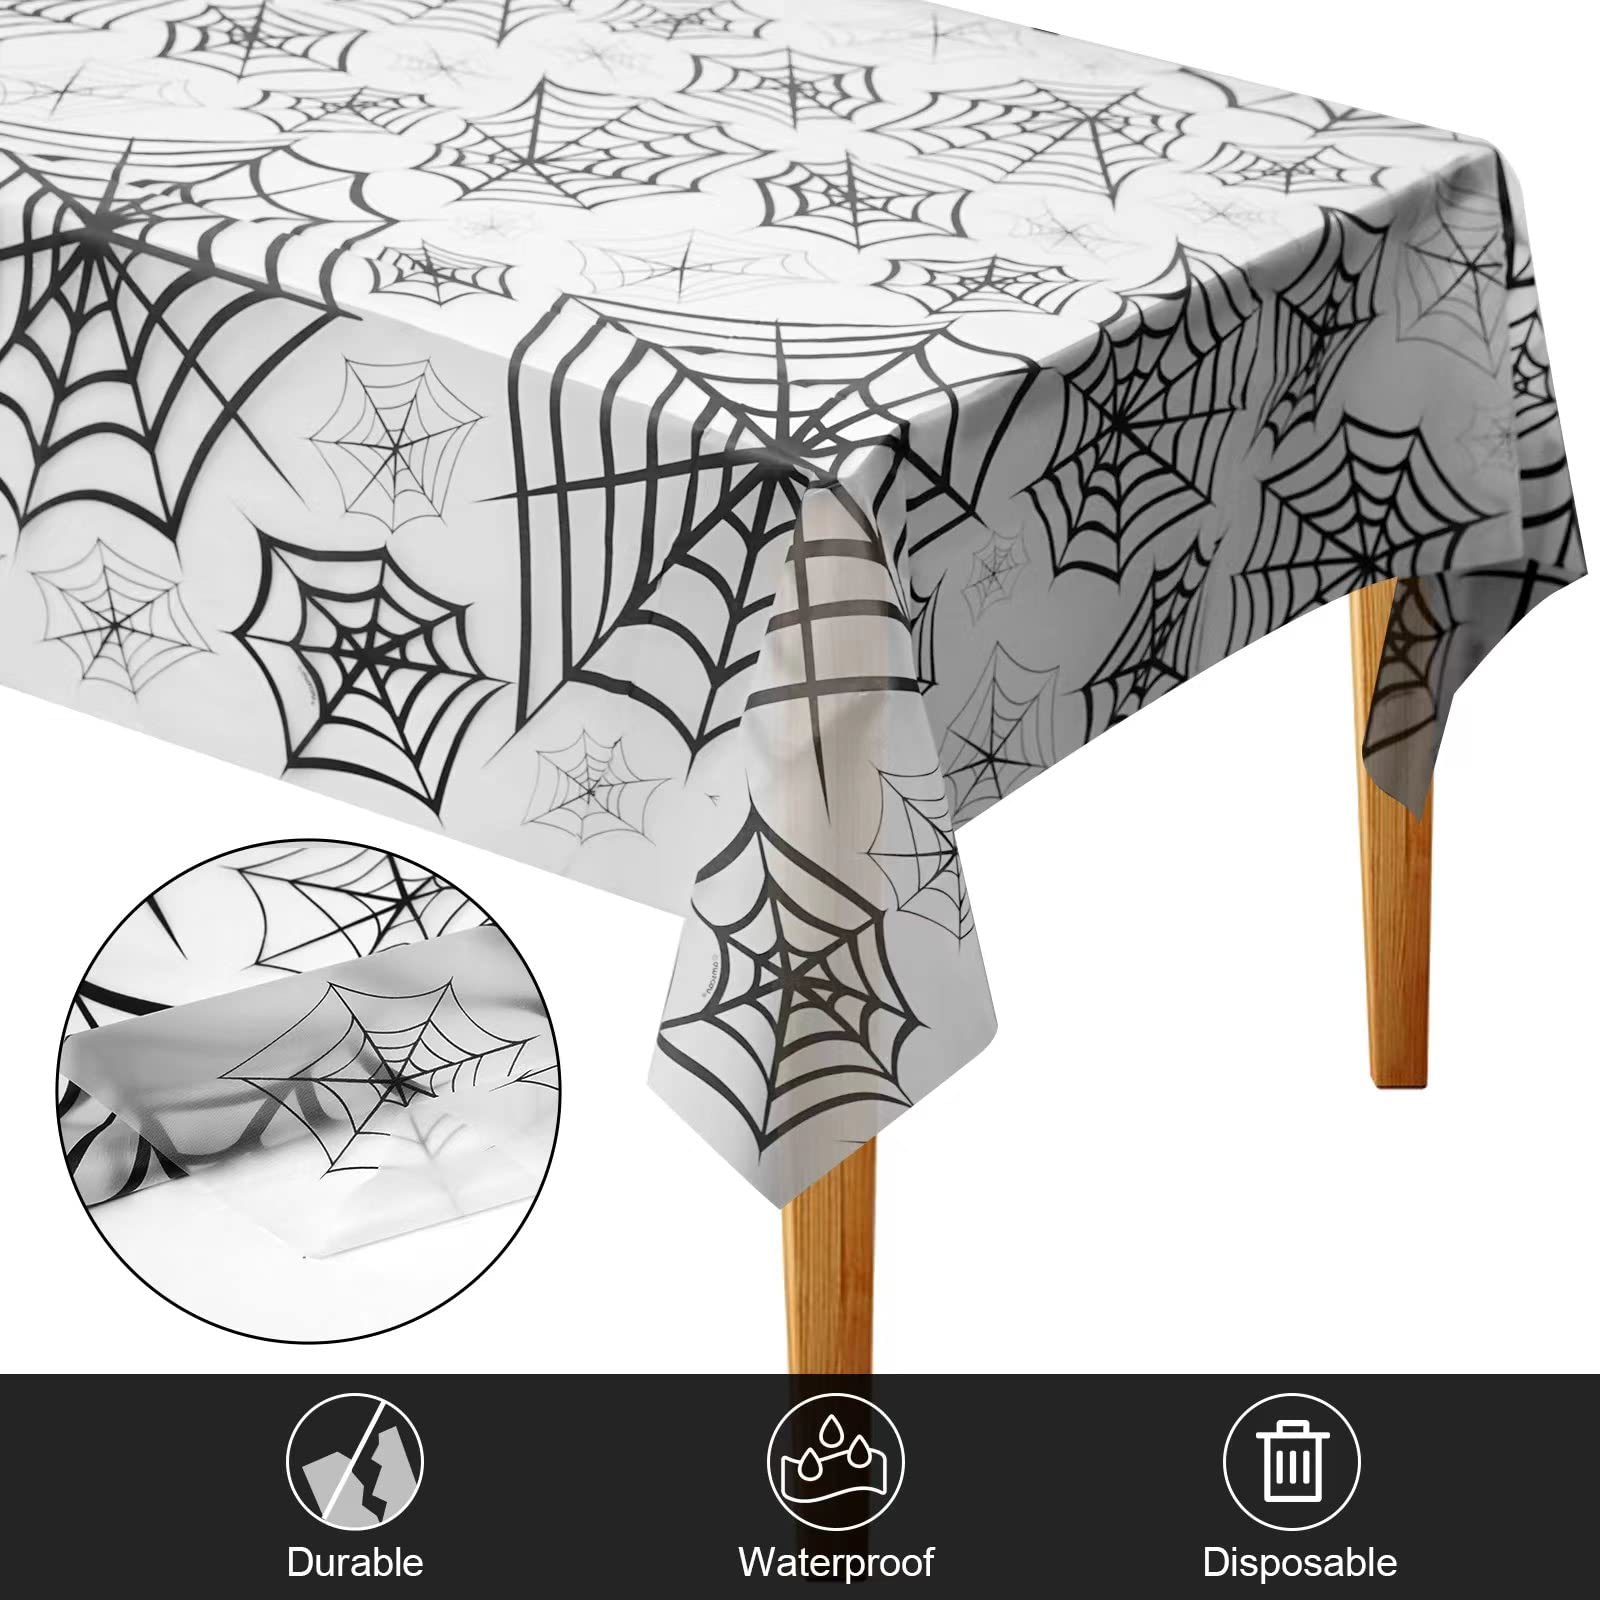 ibohr 3 Pack Halloween Disposable Tablecloth Large Size Spider Web Vinyl Waterproof Rectangle Halloween Plastic Tablecloth for Halloween Table Decoration, Home Party Decor, 54 x 108 inch